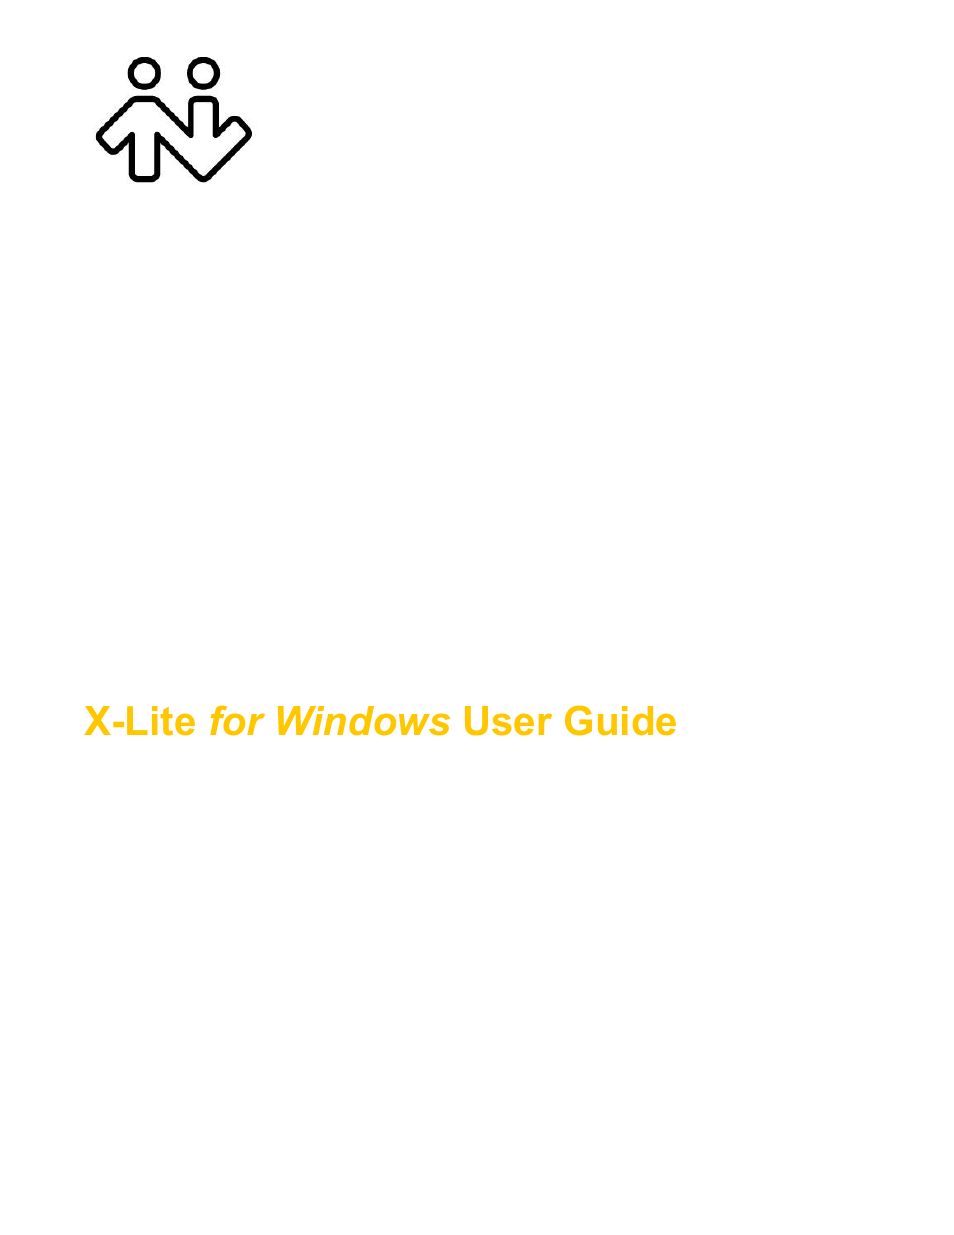 CounterPath X-Lite 4.7 for Windows User Guide User Manual | 66 pages